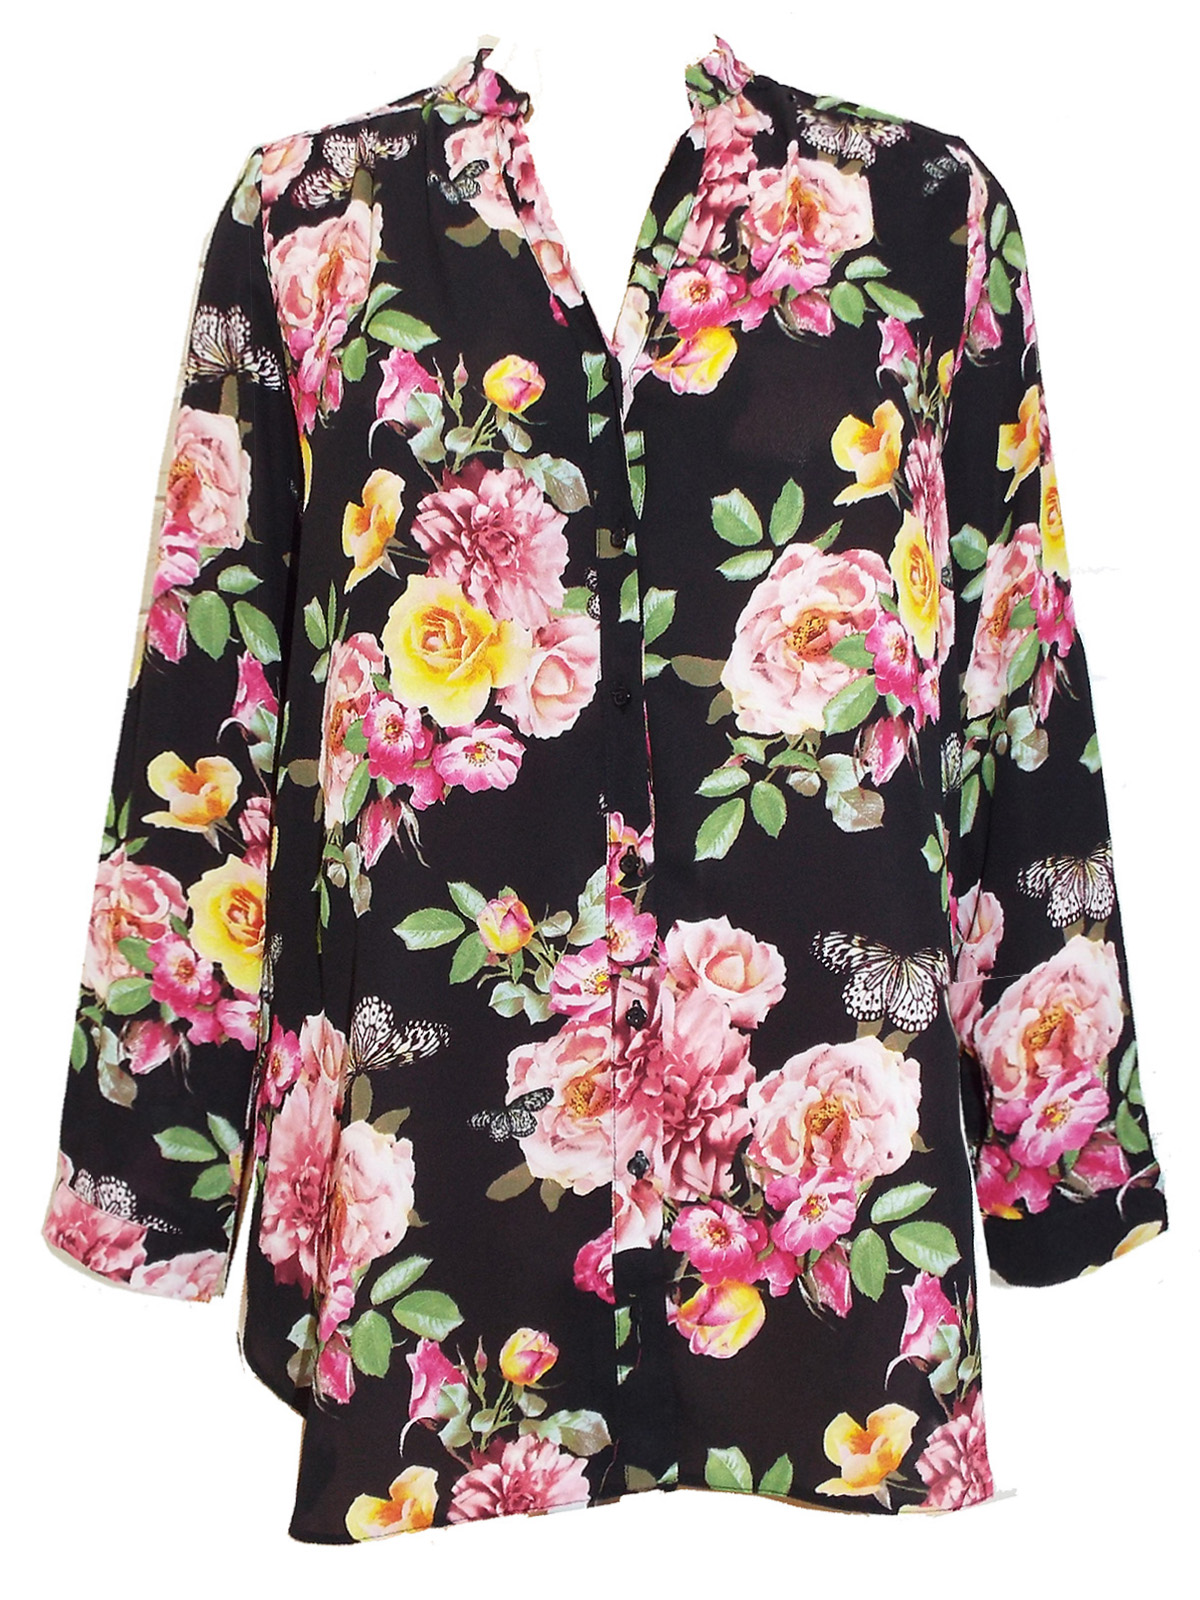 BLACK Butterfly & Floral Print Longline Blouse - Plus Size 16 to 32